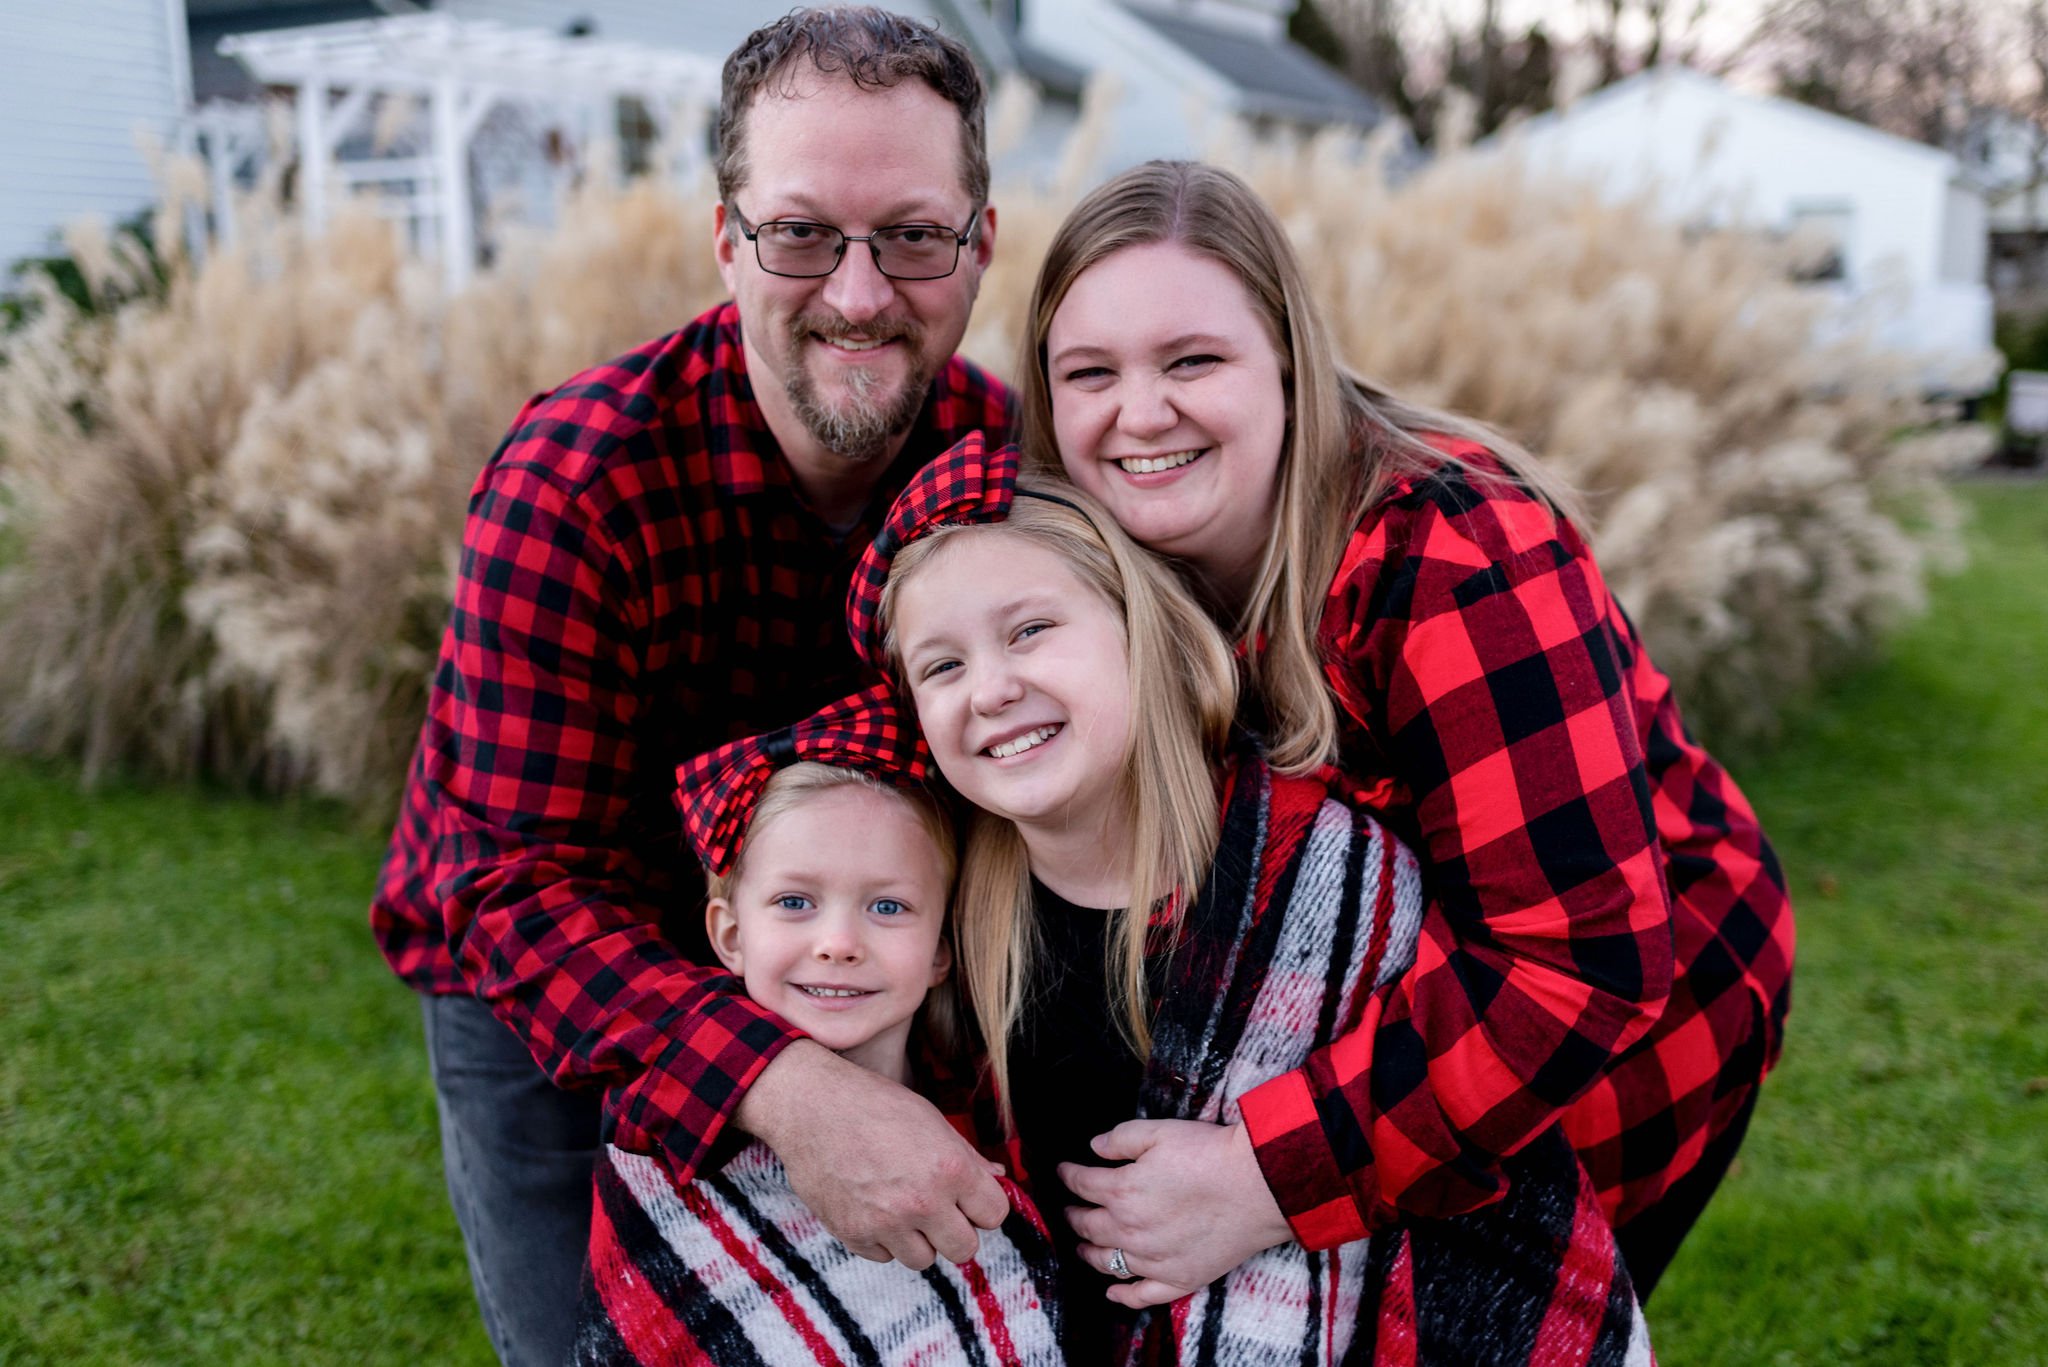 Mom, Dad and daughters together in holiday family photo outside